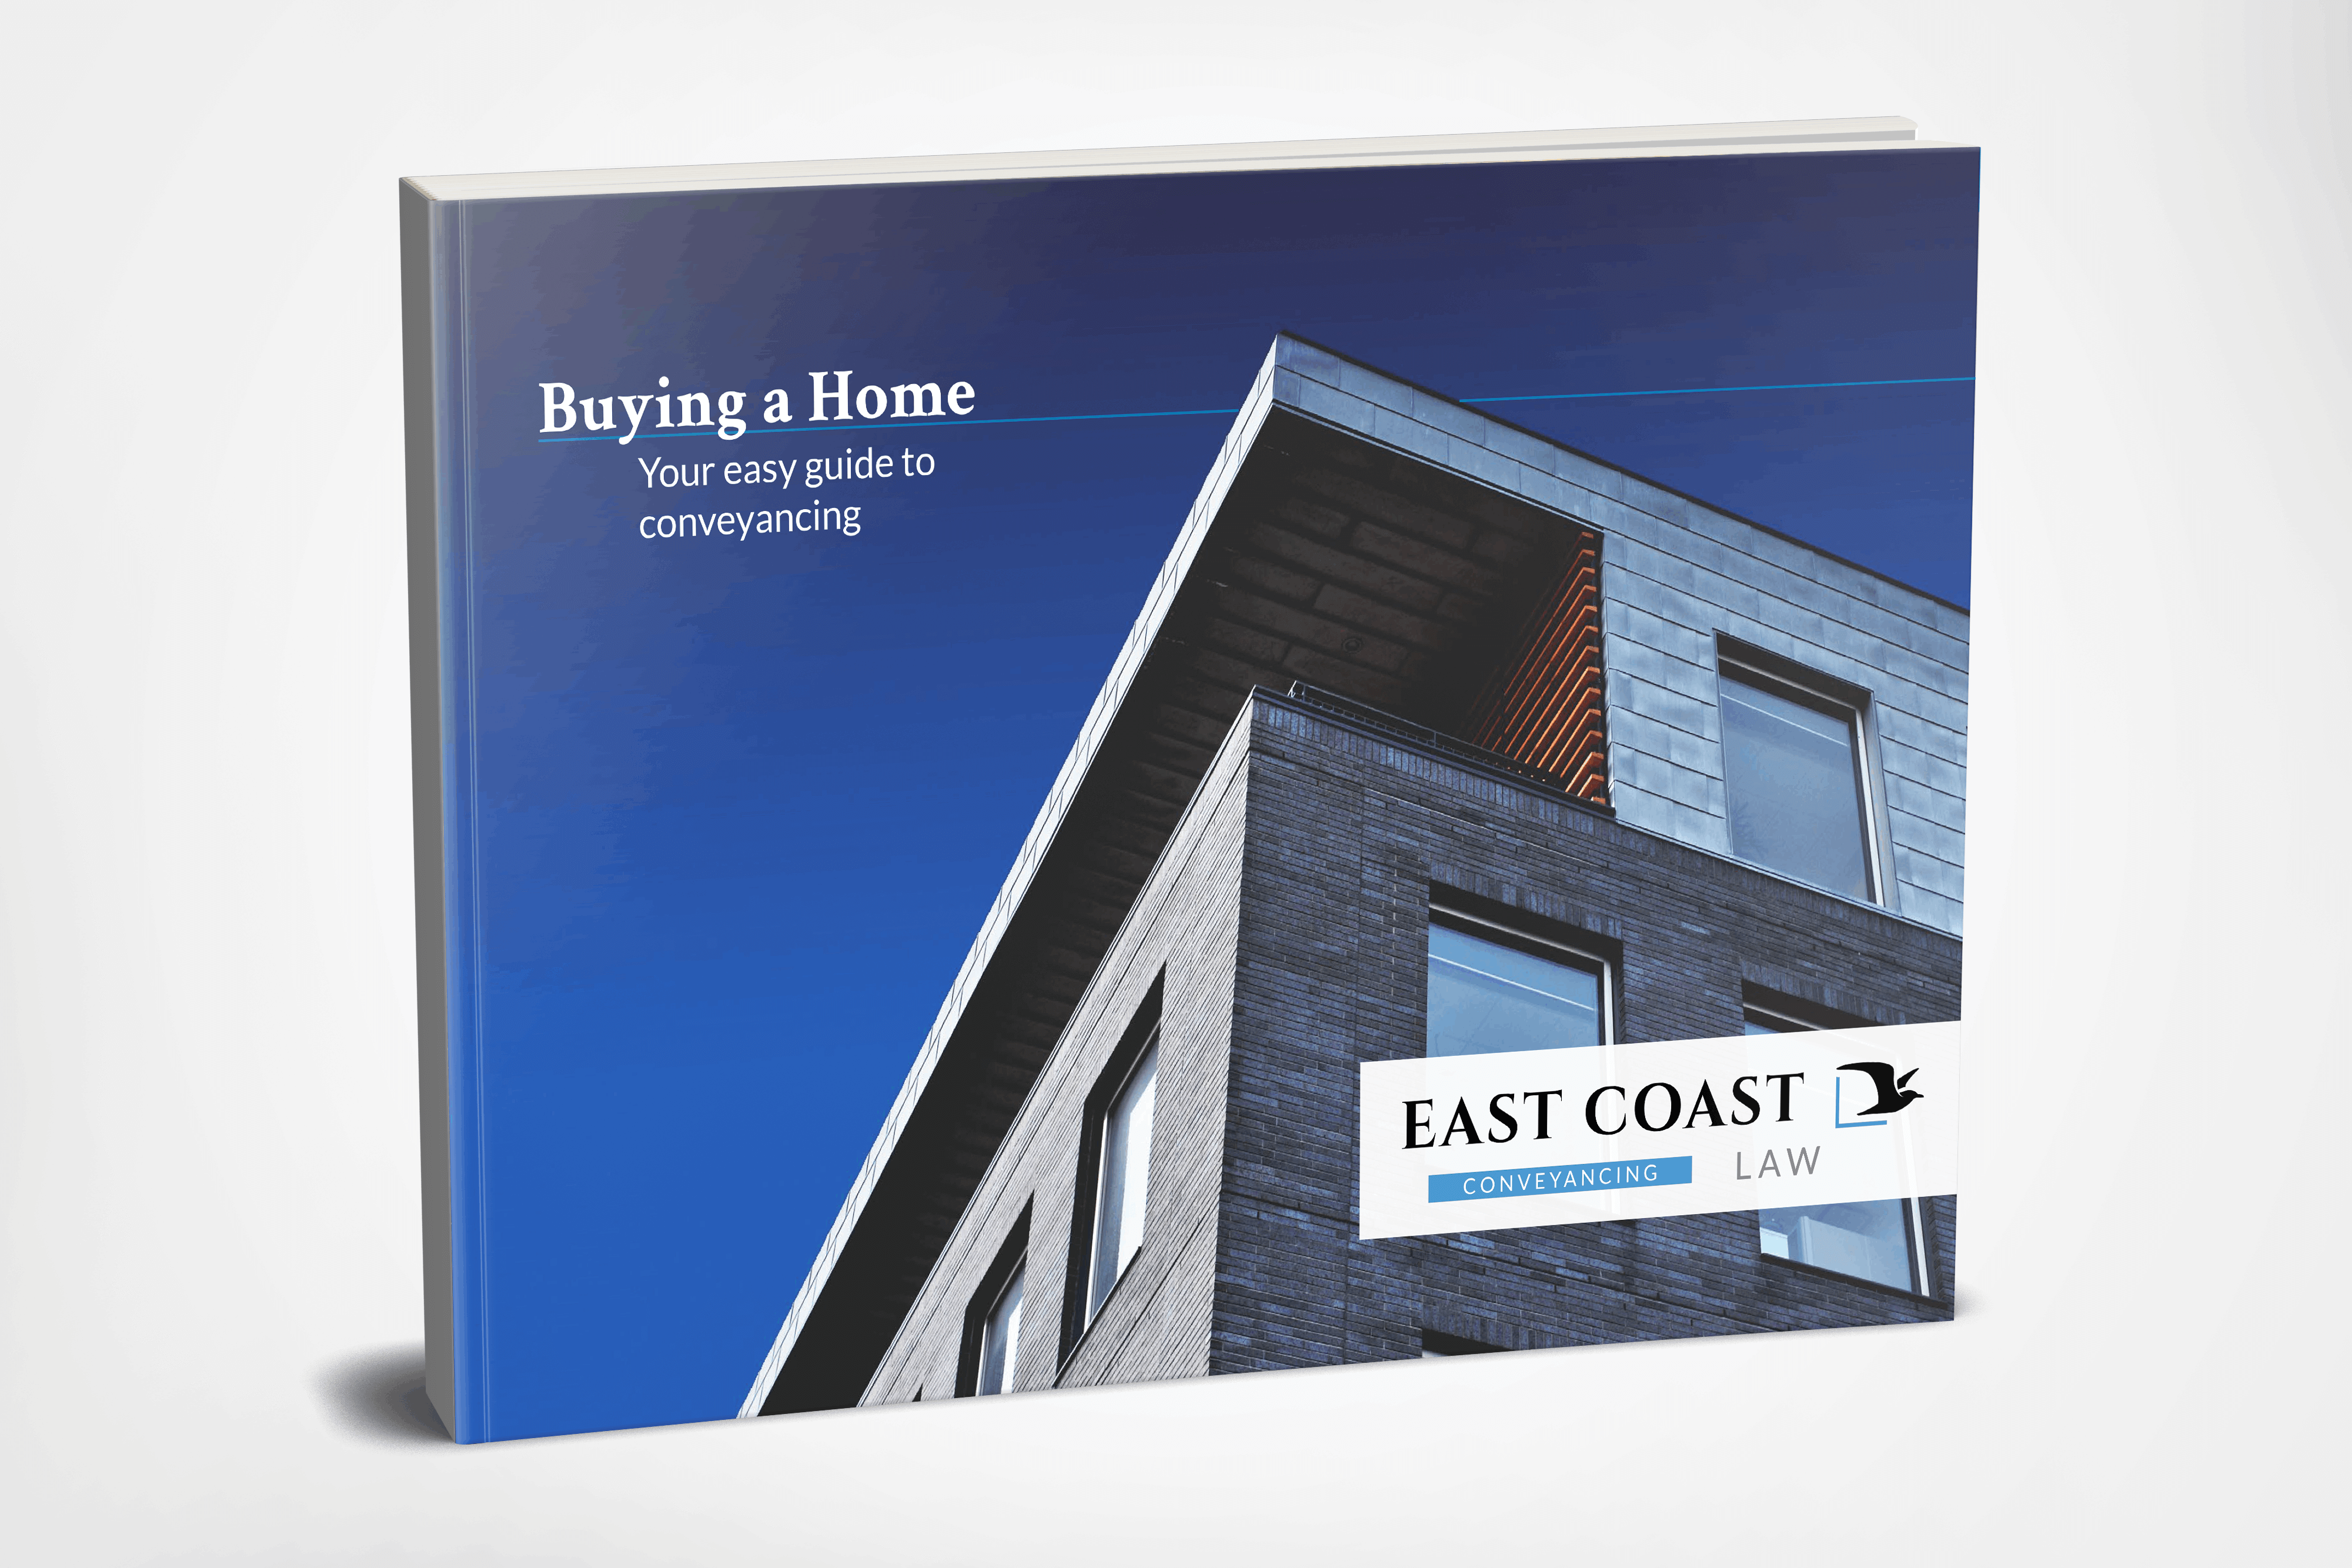 Download our Easy guide to Conveyancing